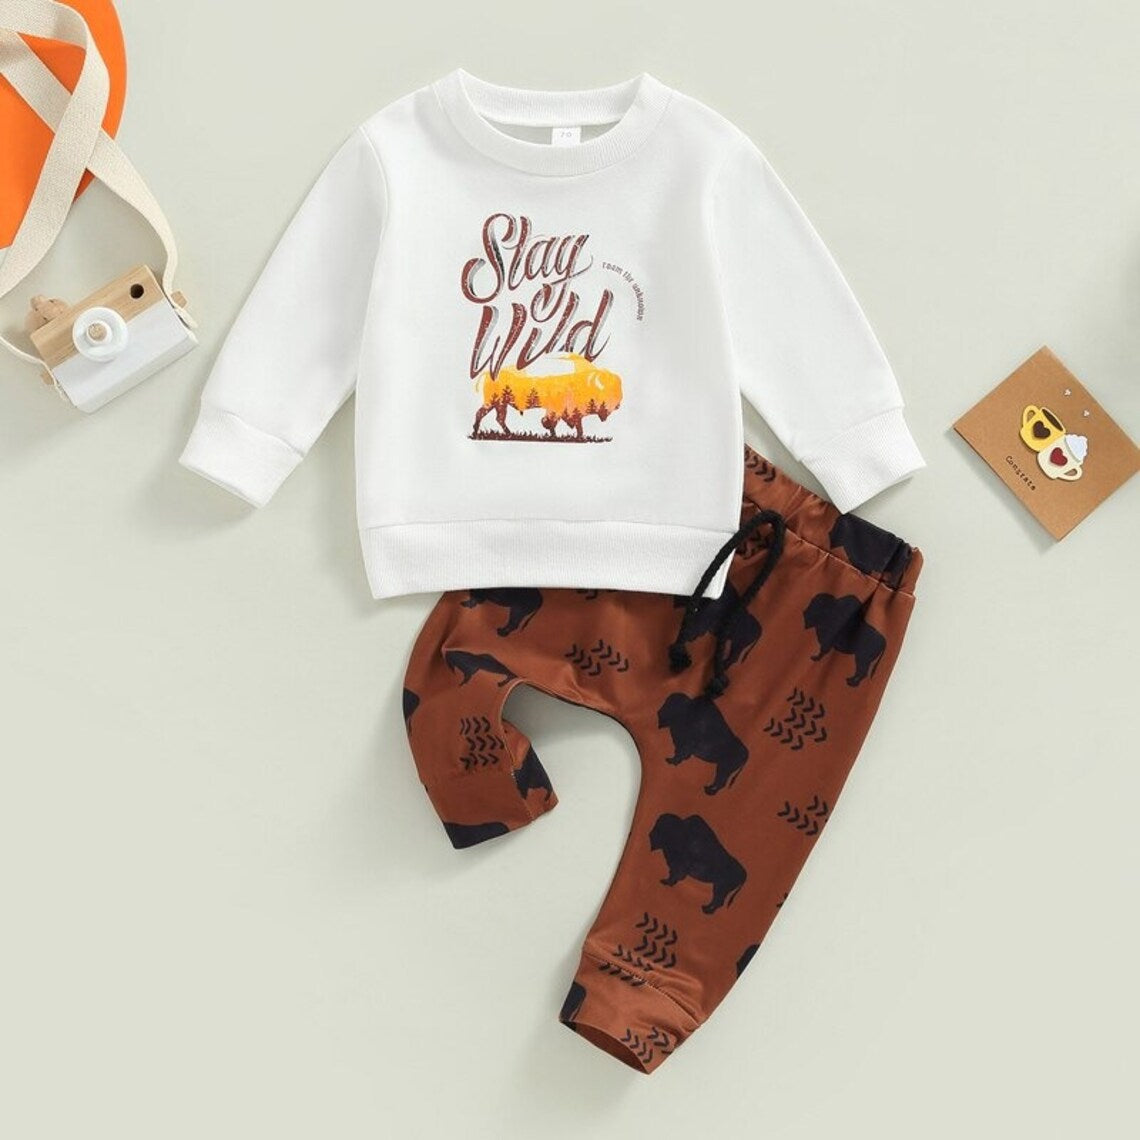 Cattle/Cowboy Toddler & Baby Boy Outfit